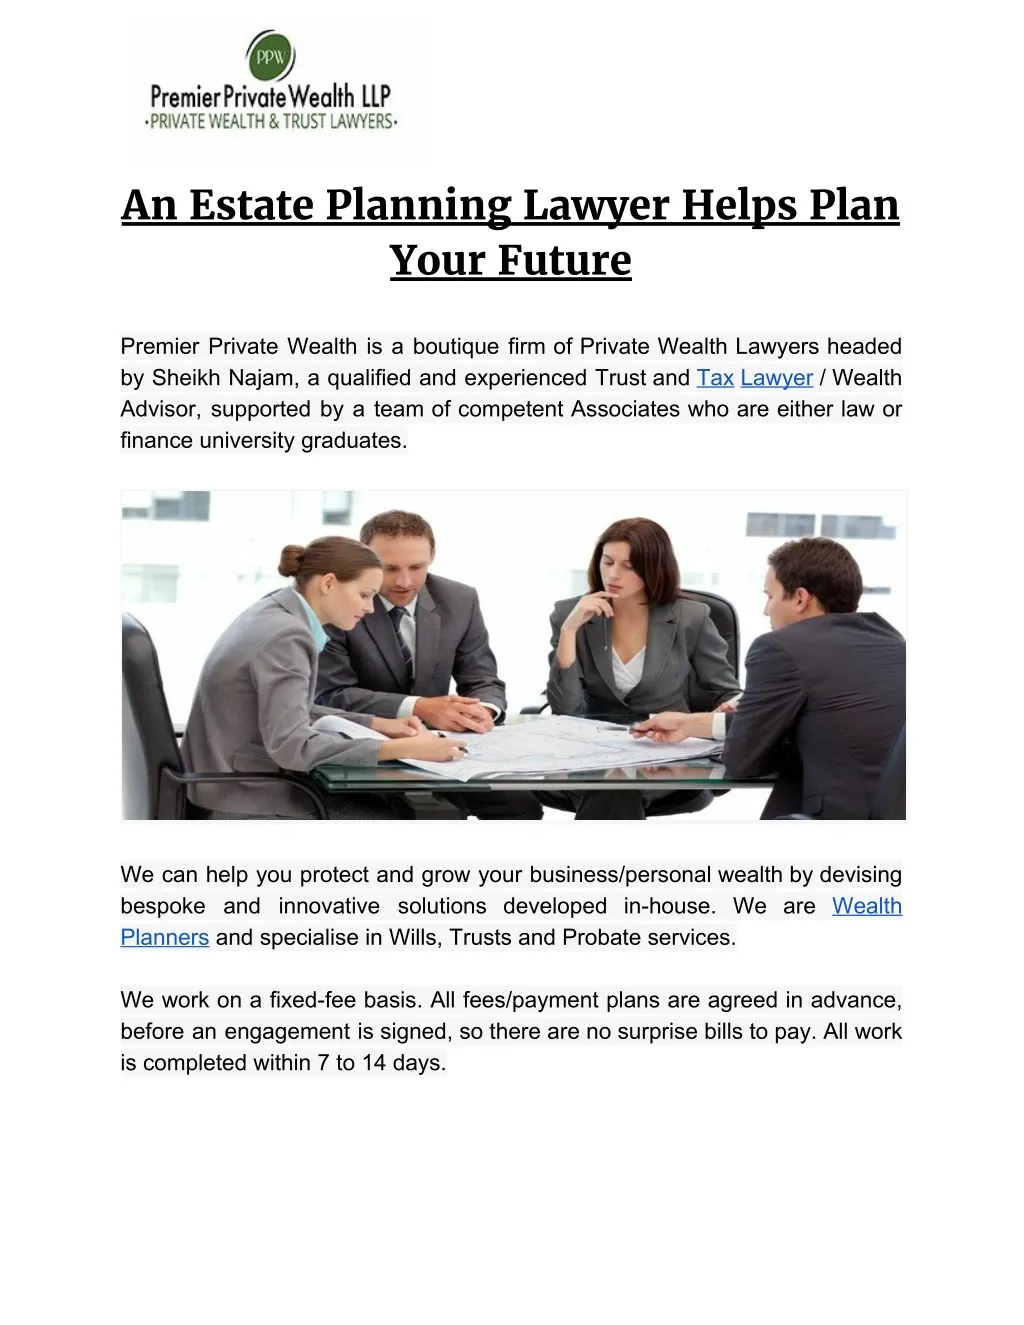 an estate planning lawyer helps plan your future